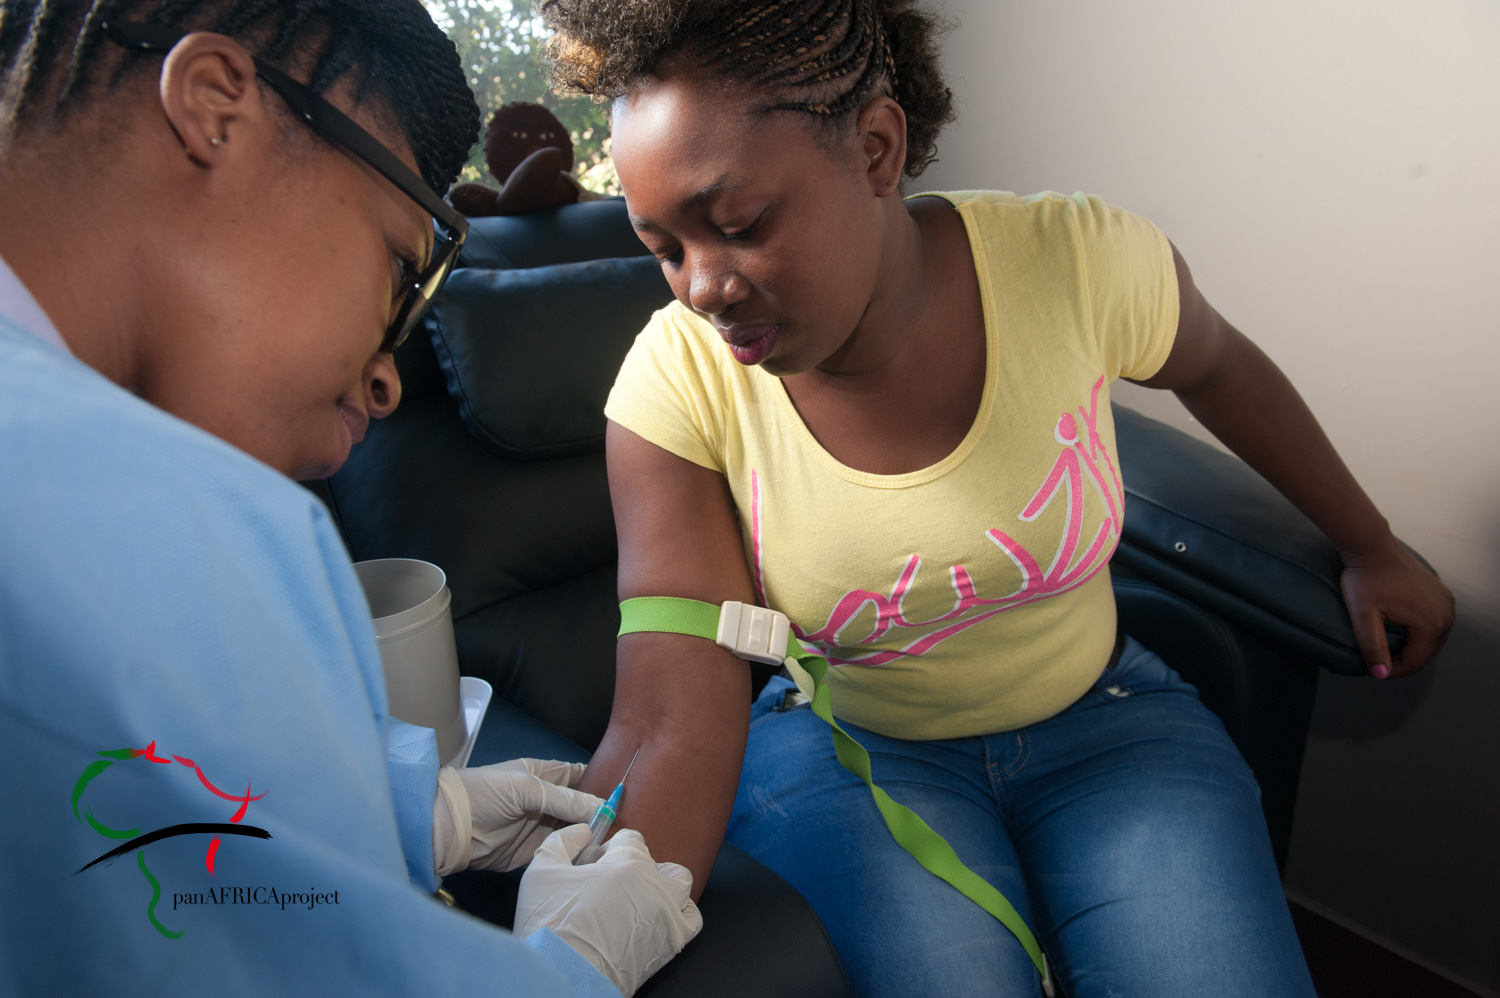 Patient receives a phlebotomy